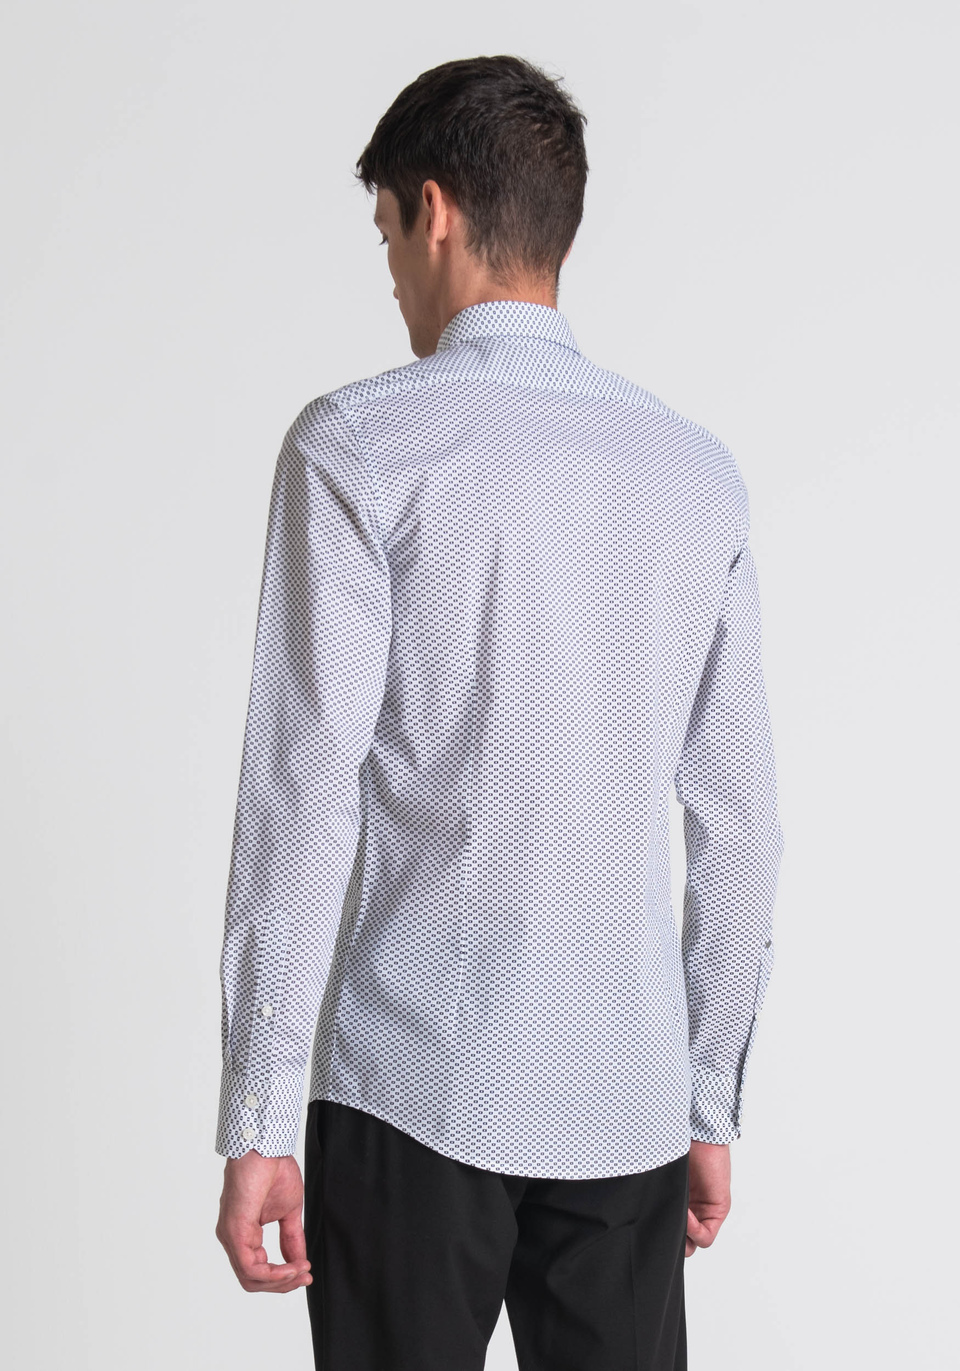 SLIM-FIT SHIRT IN 100% SOFT COTTON WITH A GEOMETRIC MICRO-PATTERN PRINT - Antony Morato Online Shop